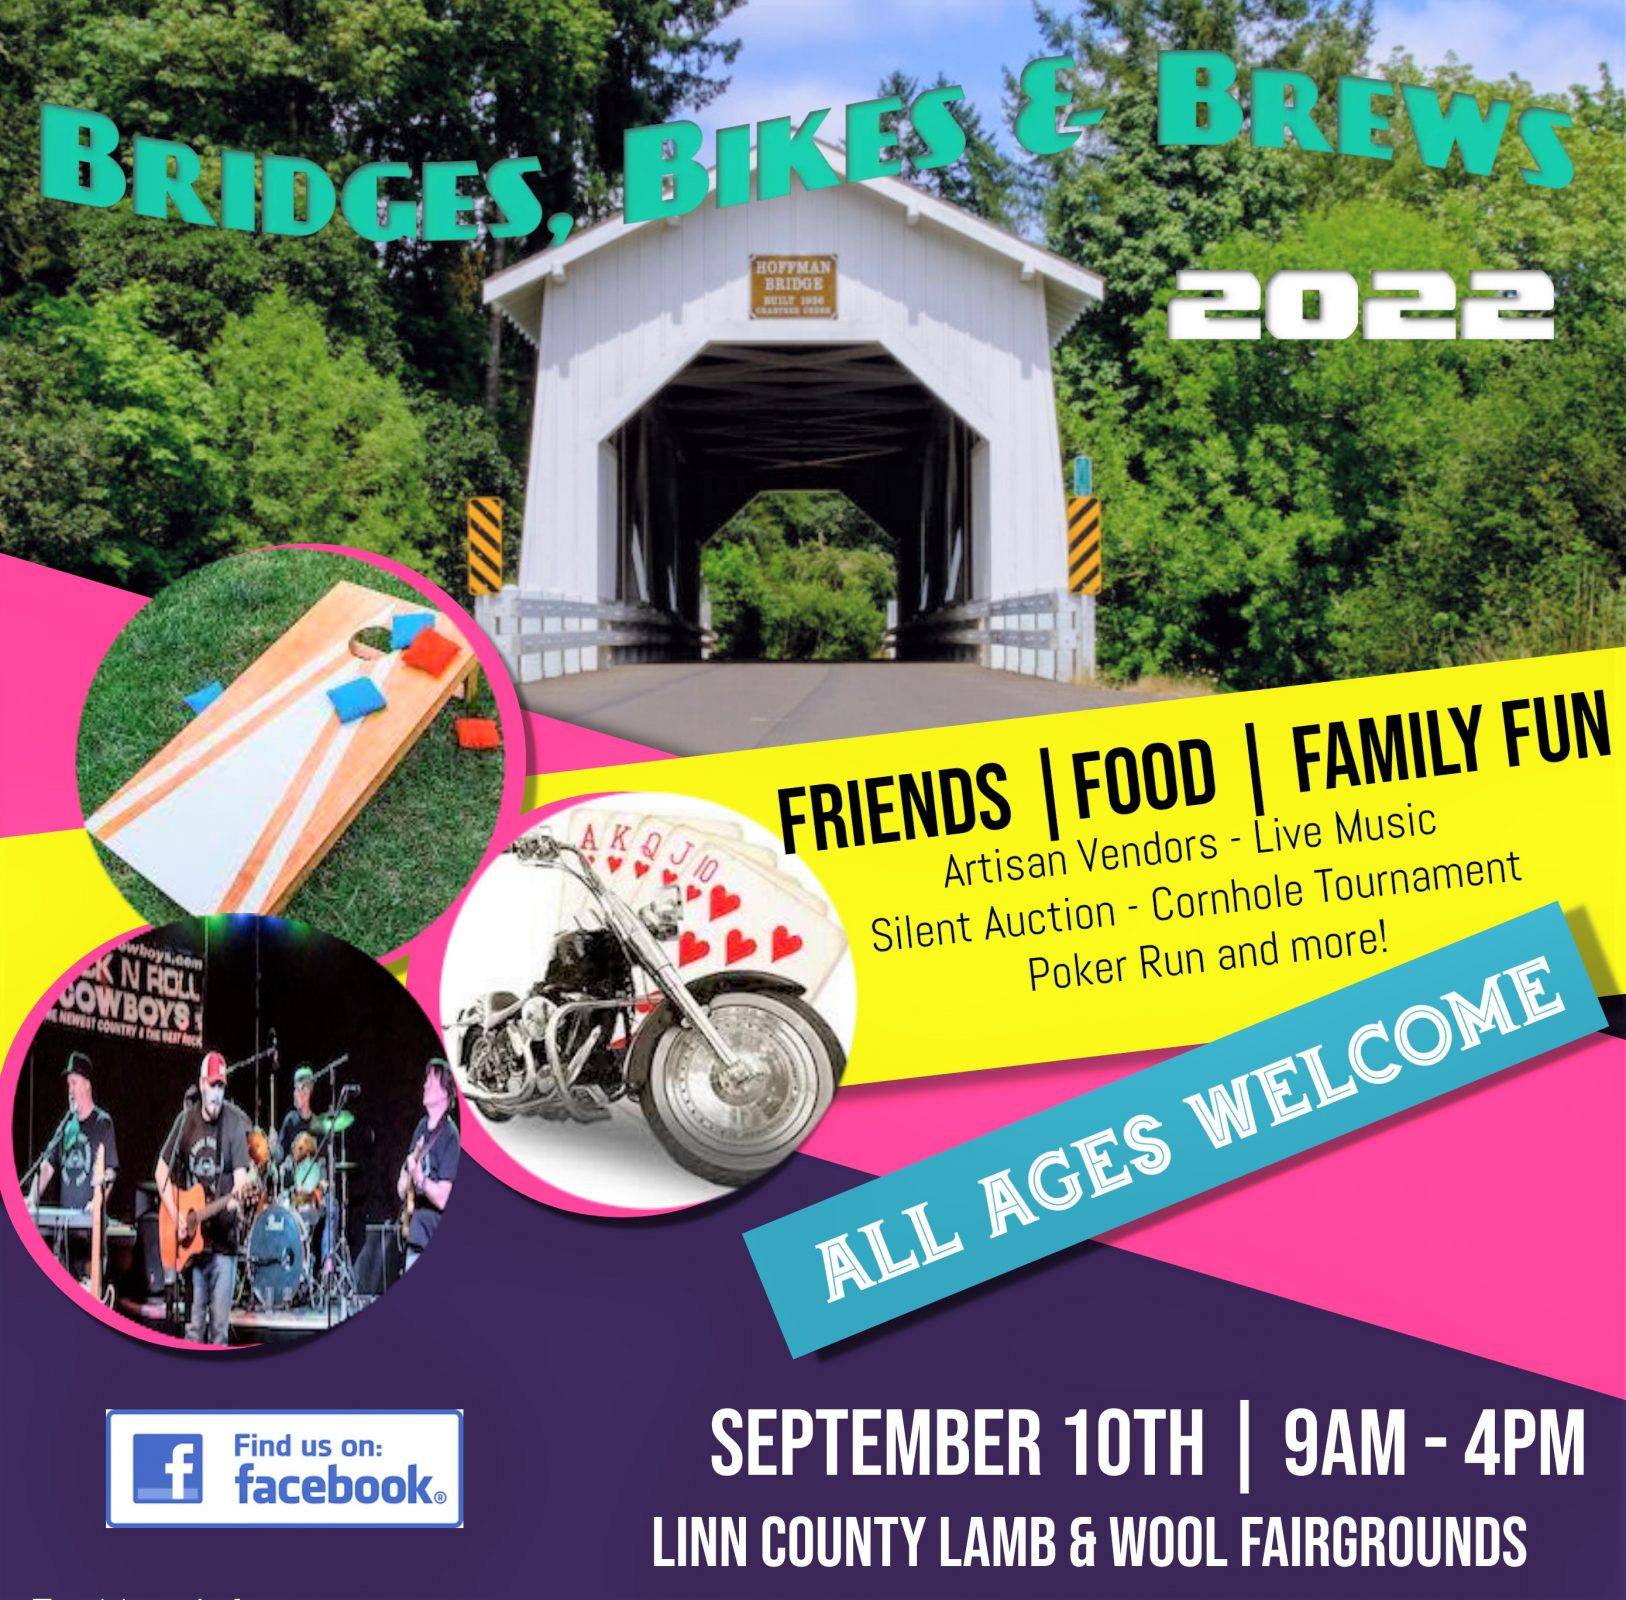 photo of covered bridge with event information